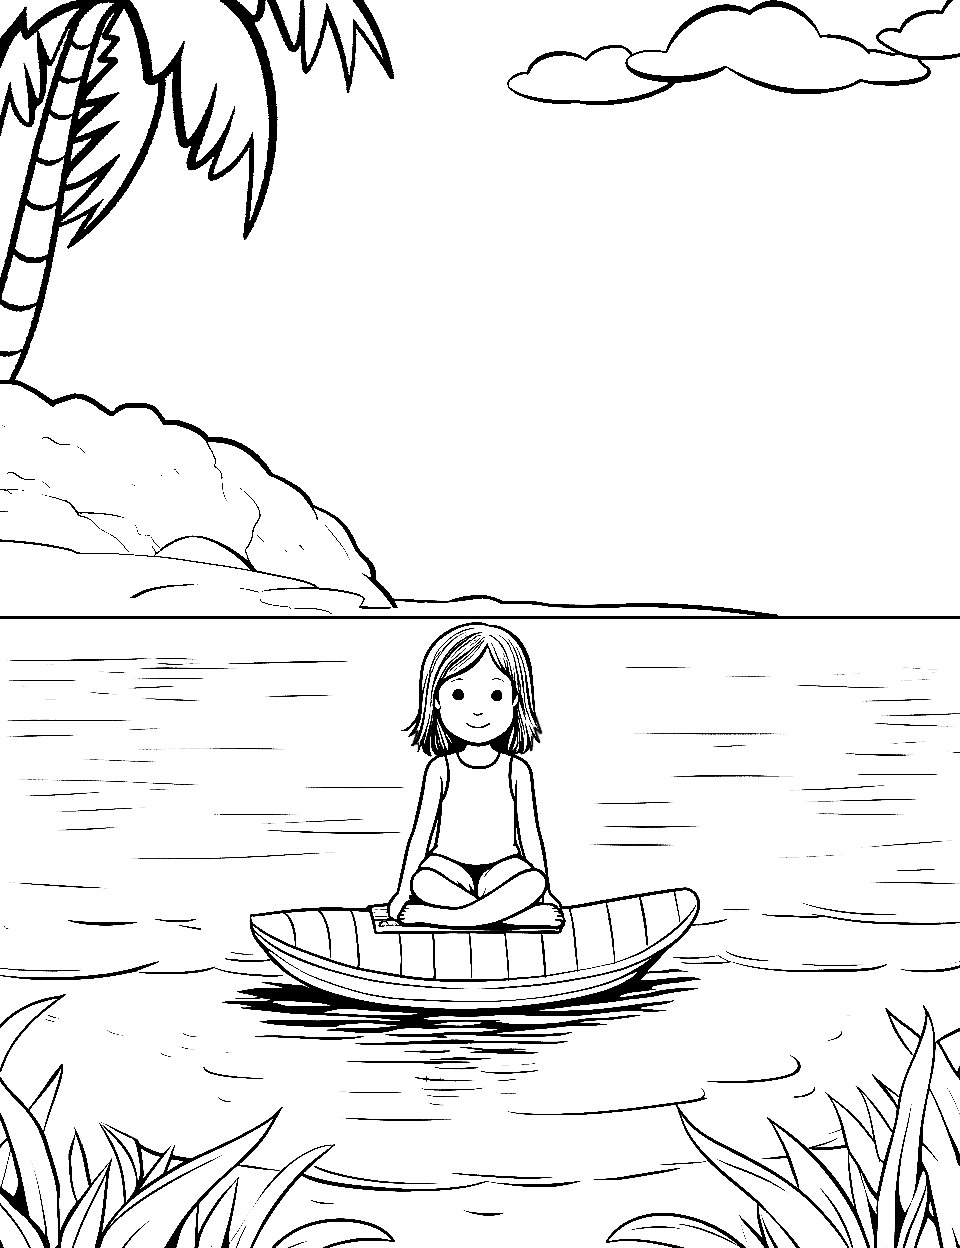 Floating on a Raft Coloring Page - A relaxed child floating on a simple raft in a calm, safe swimming area.